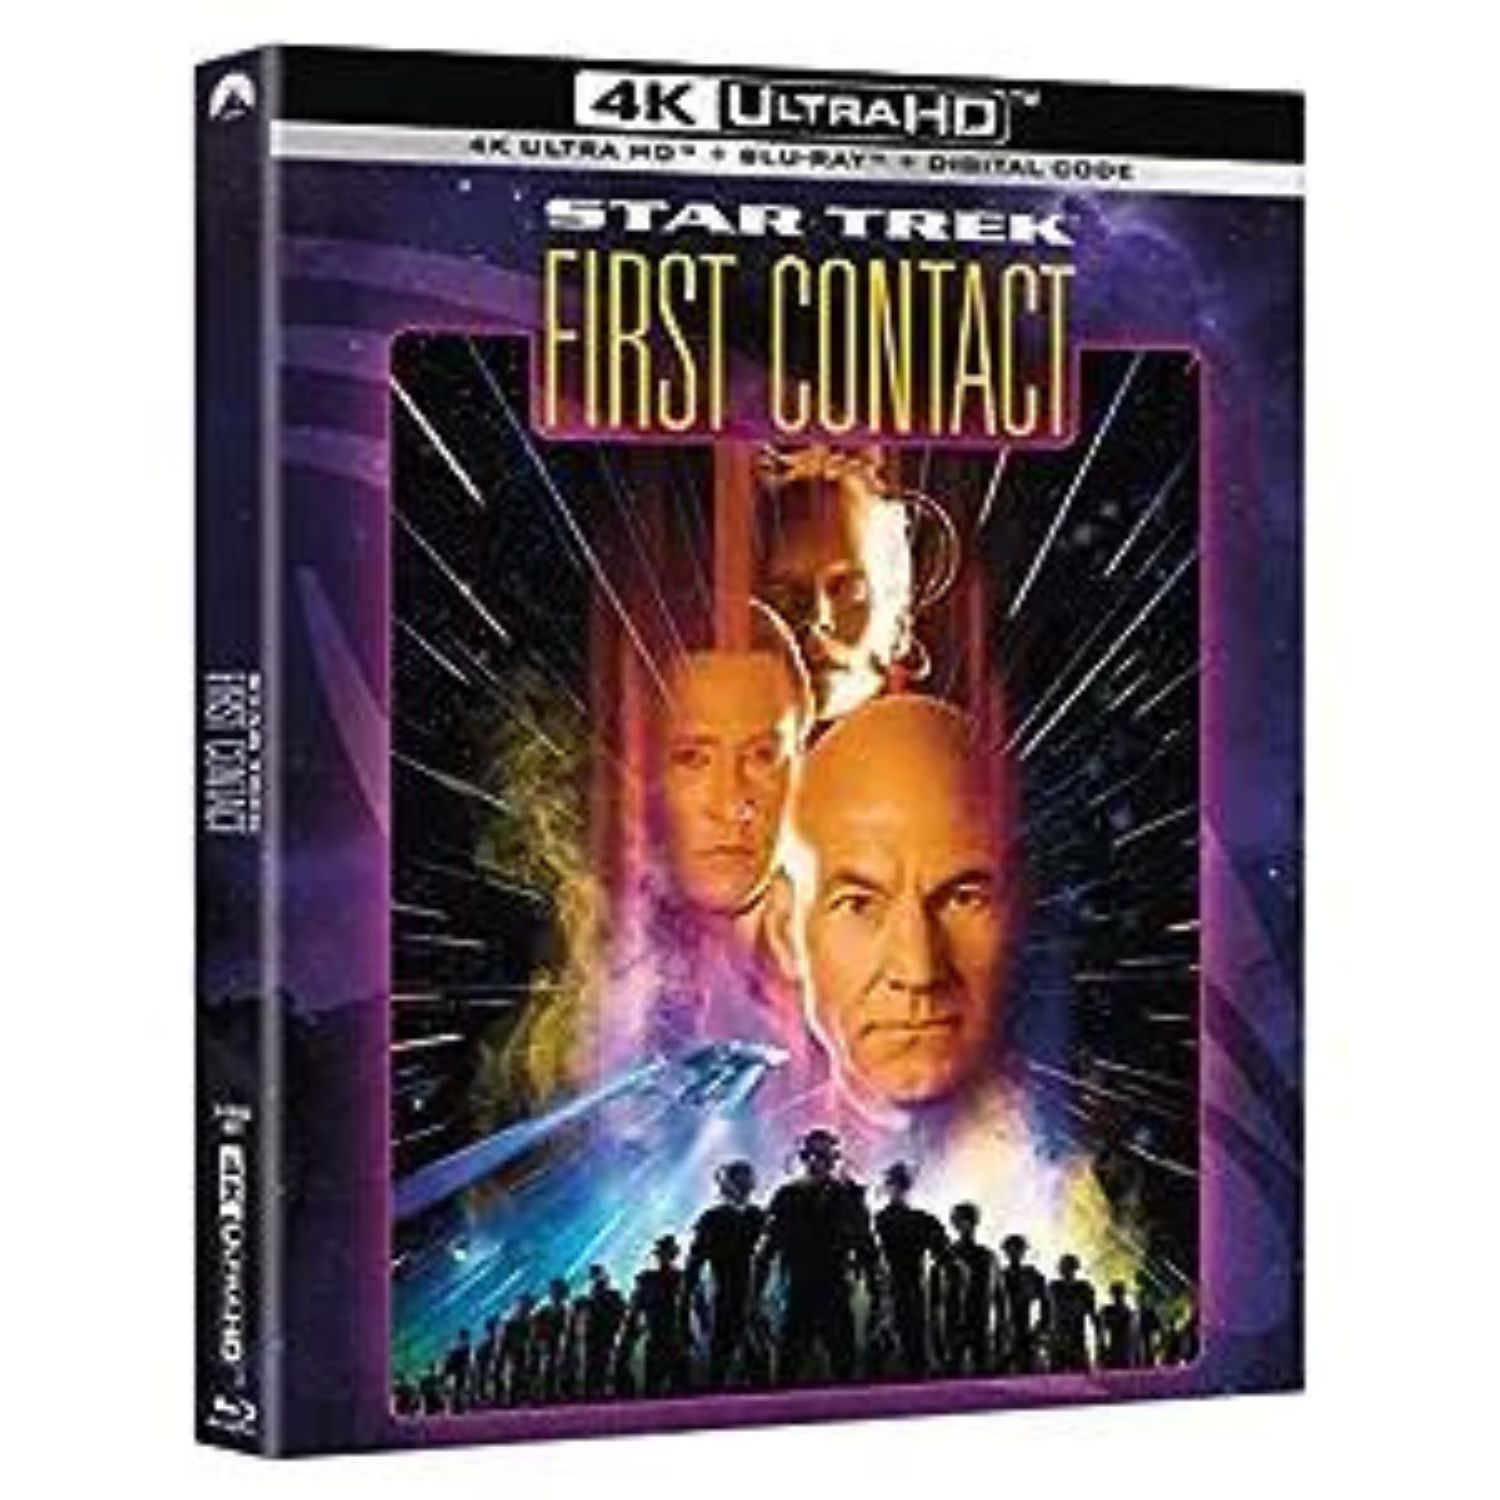 September Star Trek Sale - Nearly Every Movie & TV Show Is Discounted ...